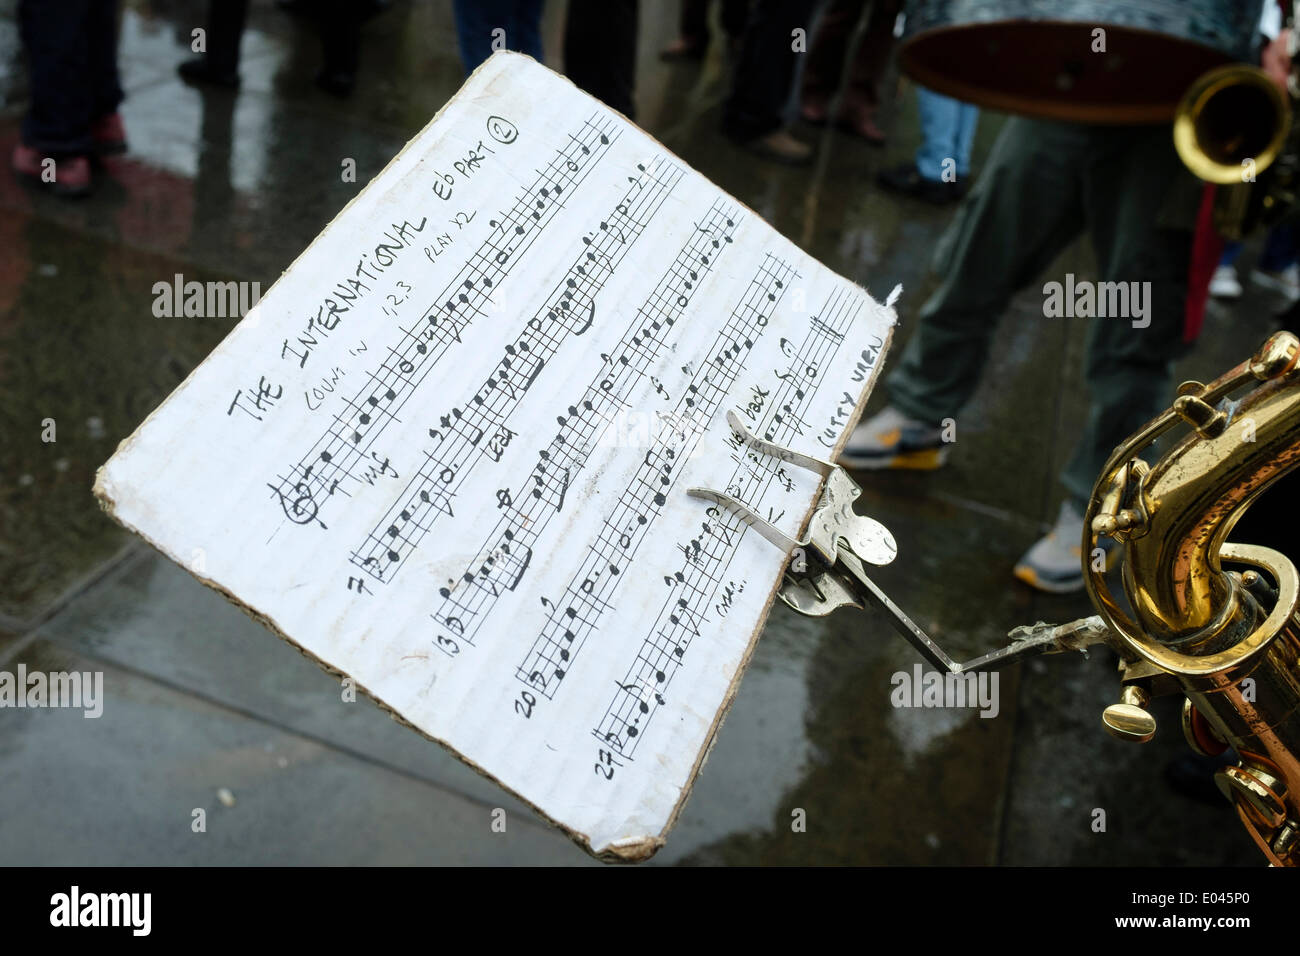 Musician plays a rendition of The International, a socialist and workers movements' anthem. Stock Photo